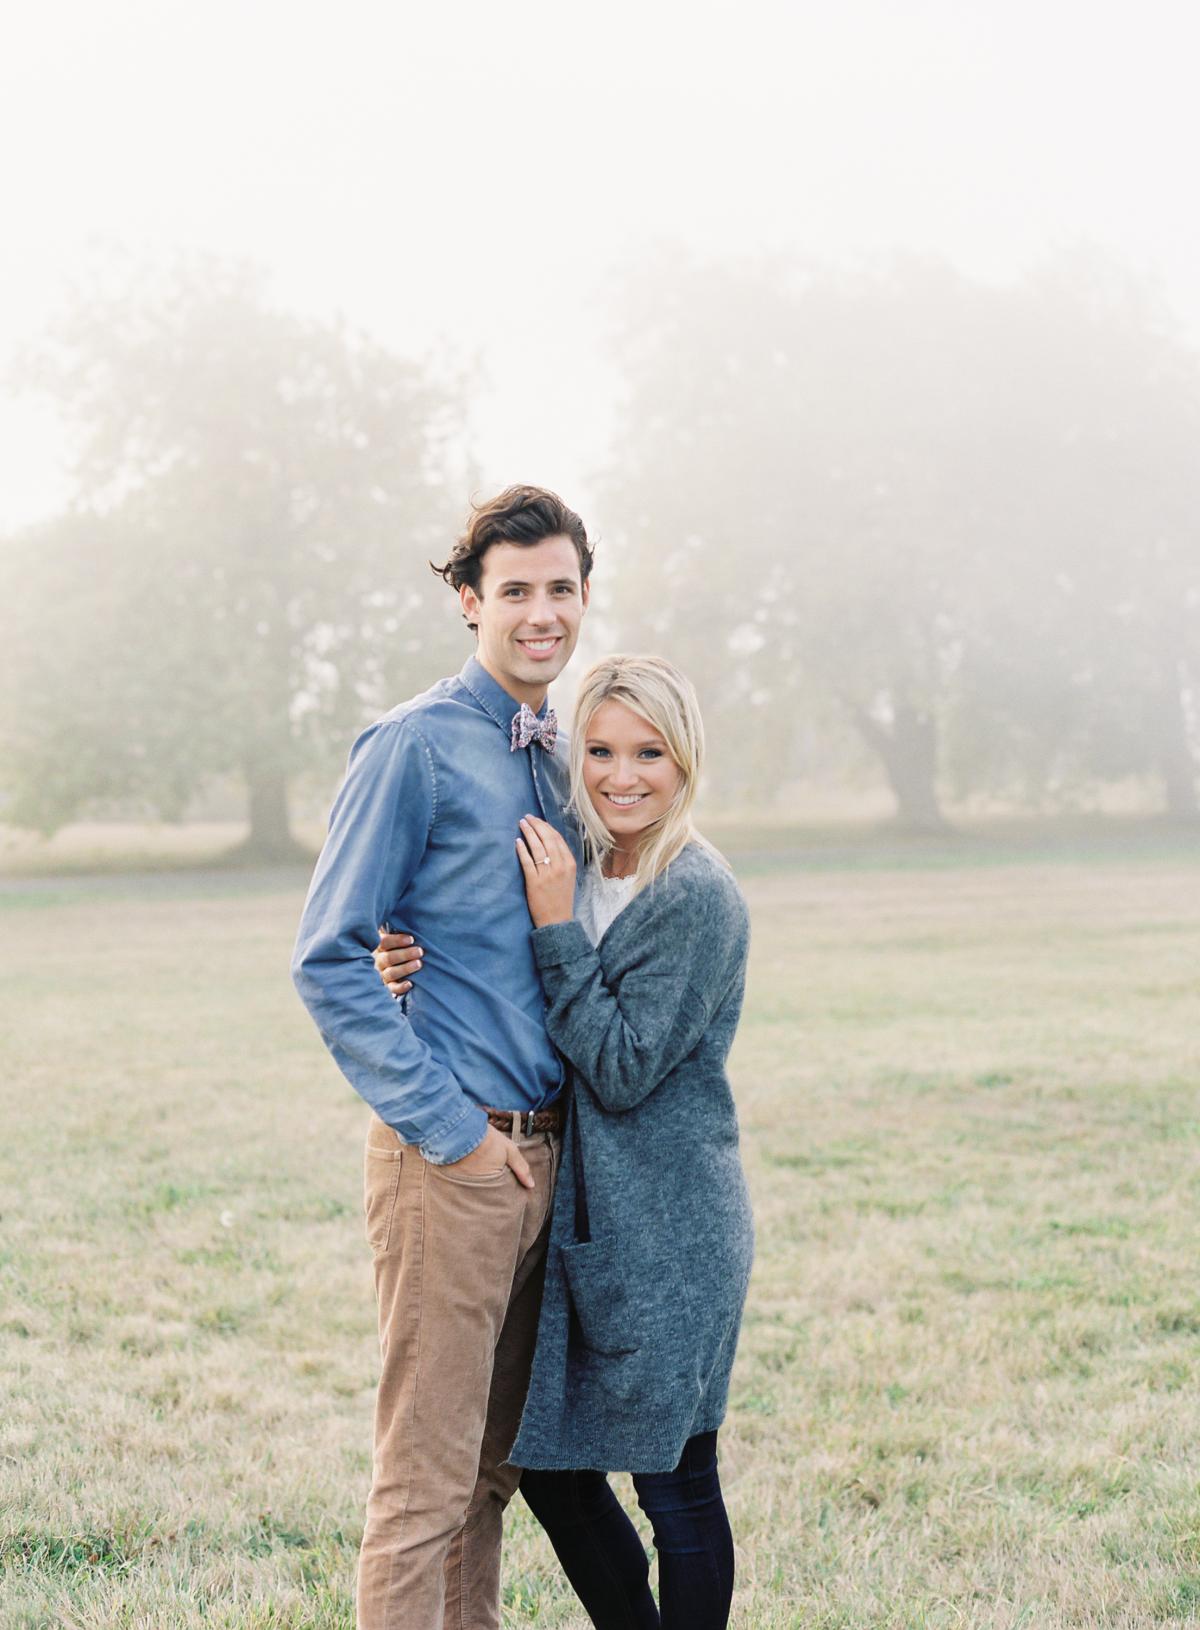 Foggy seattle engagement session by omalley photographers 0004